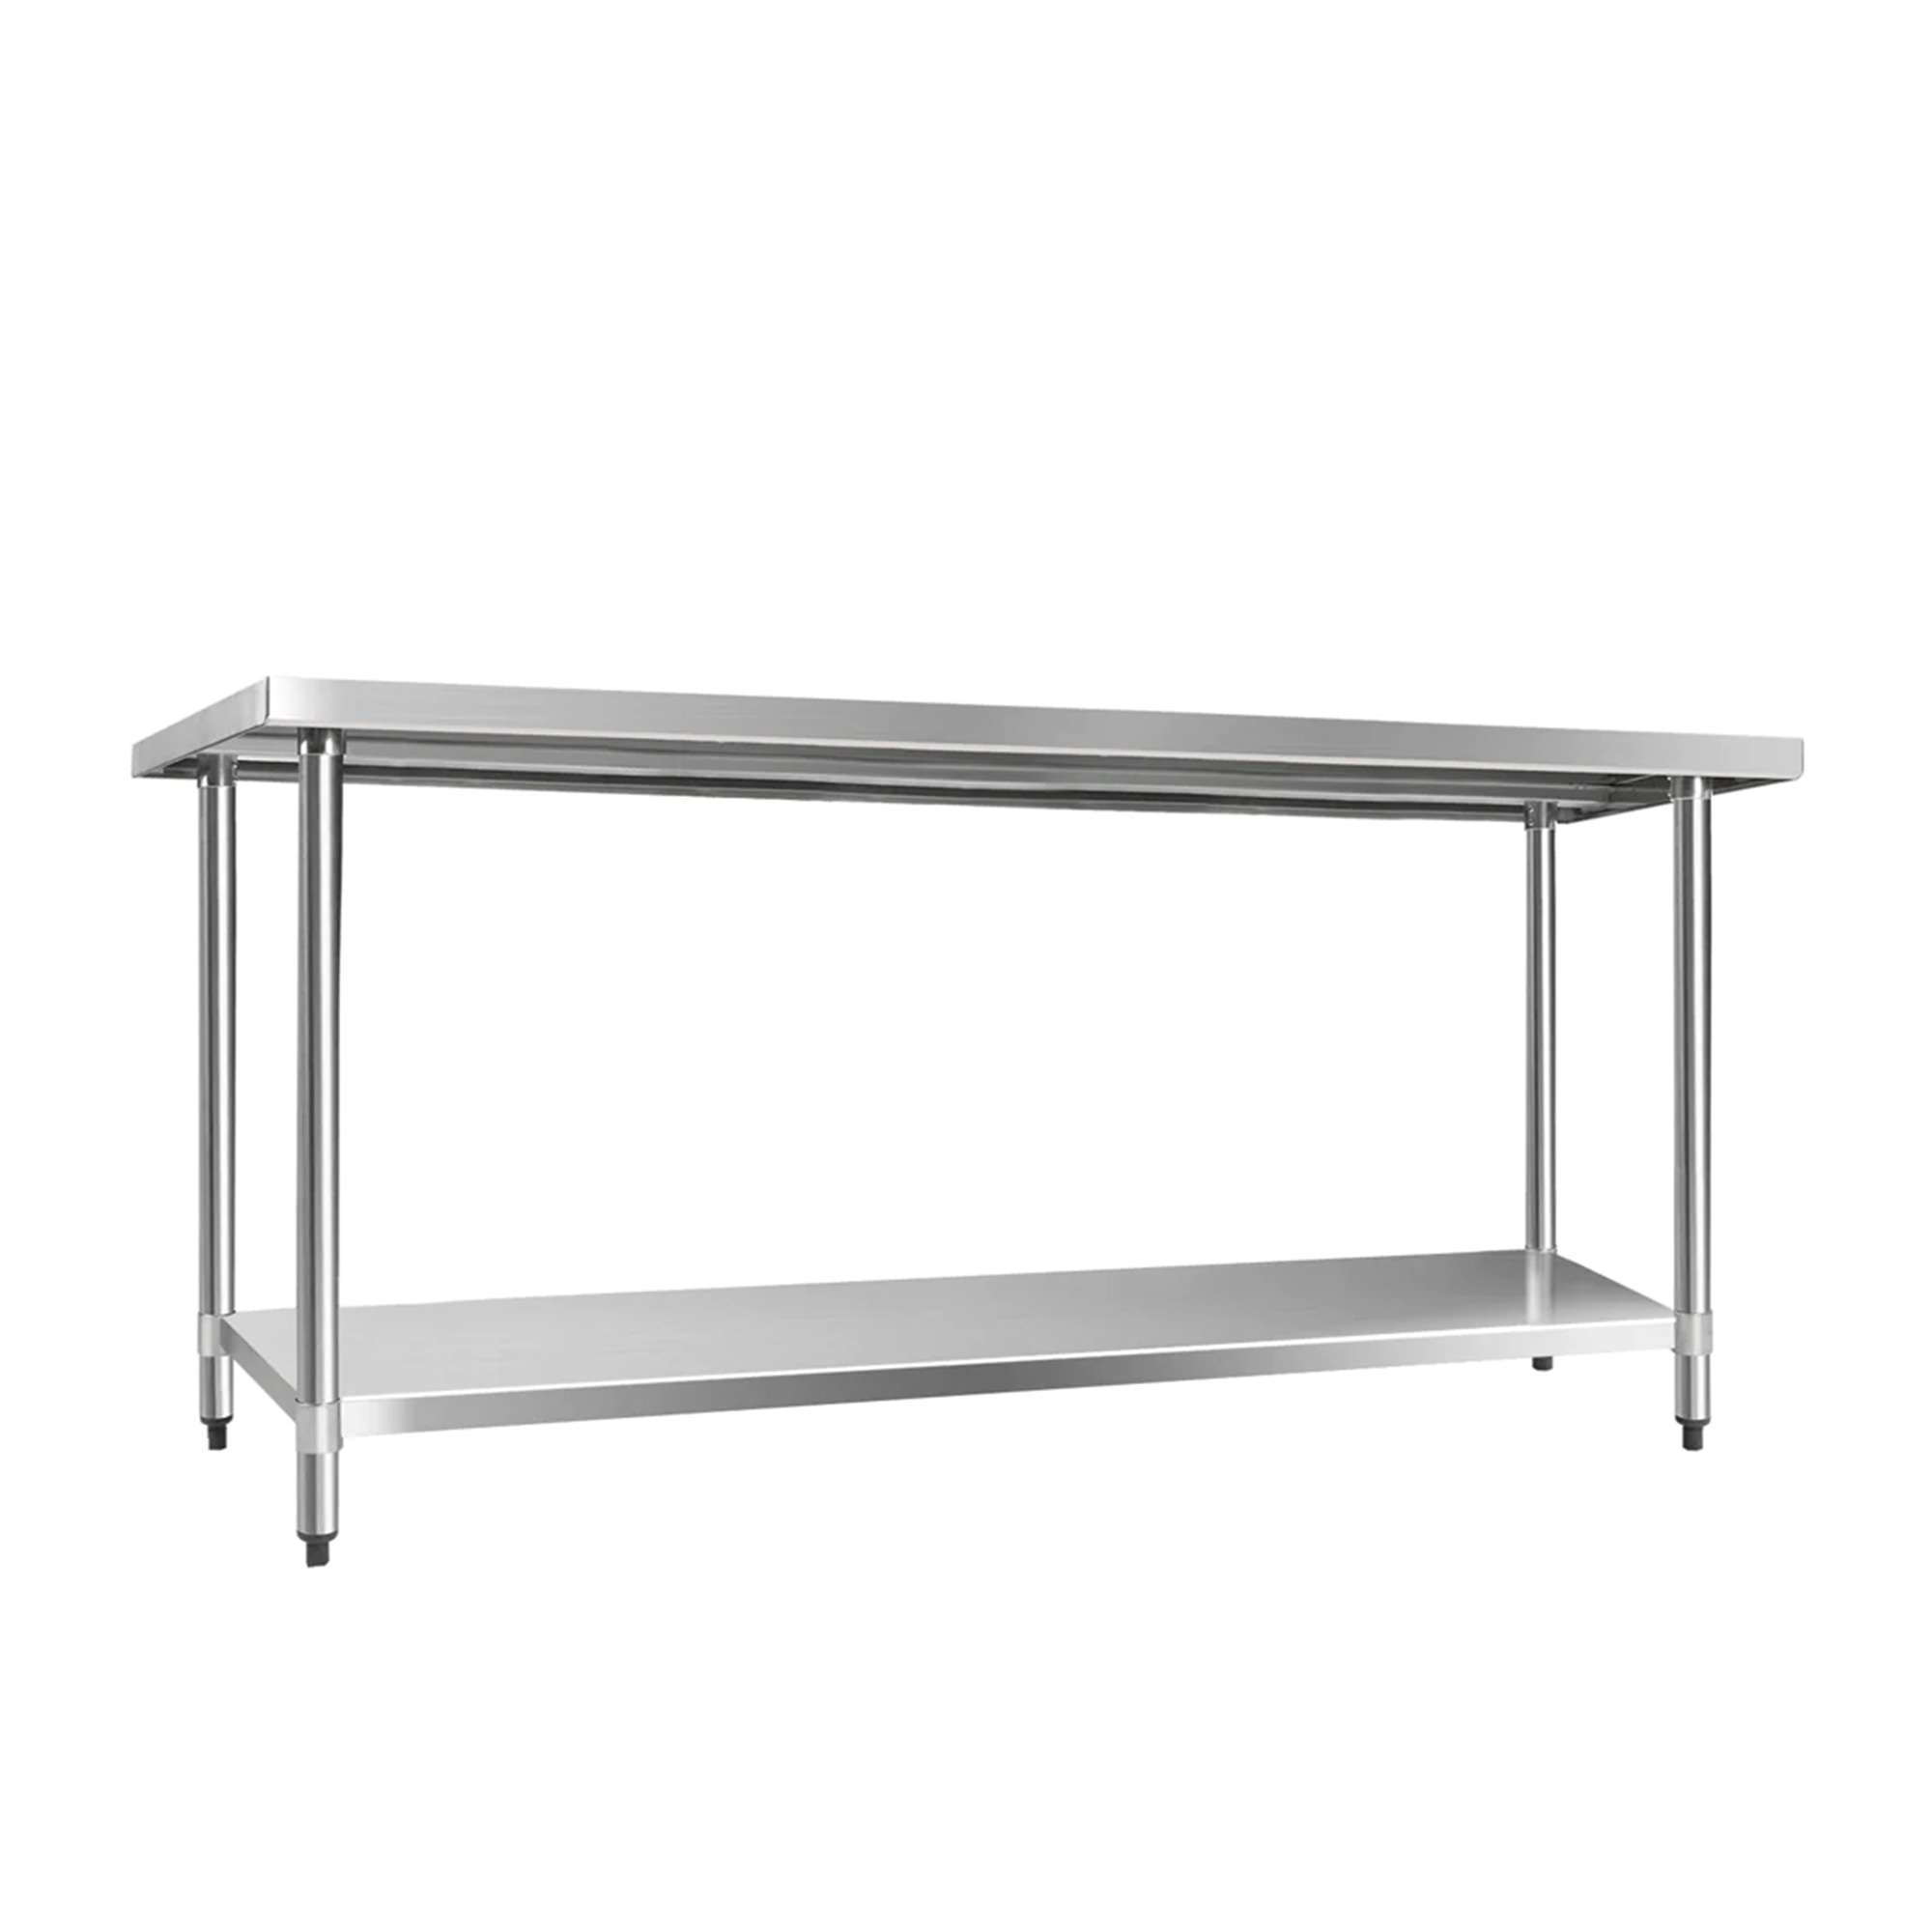 Cefito 430 Stainless Steel Kitchen Bench 182.9x61cm Image 2